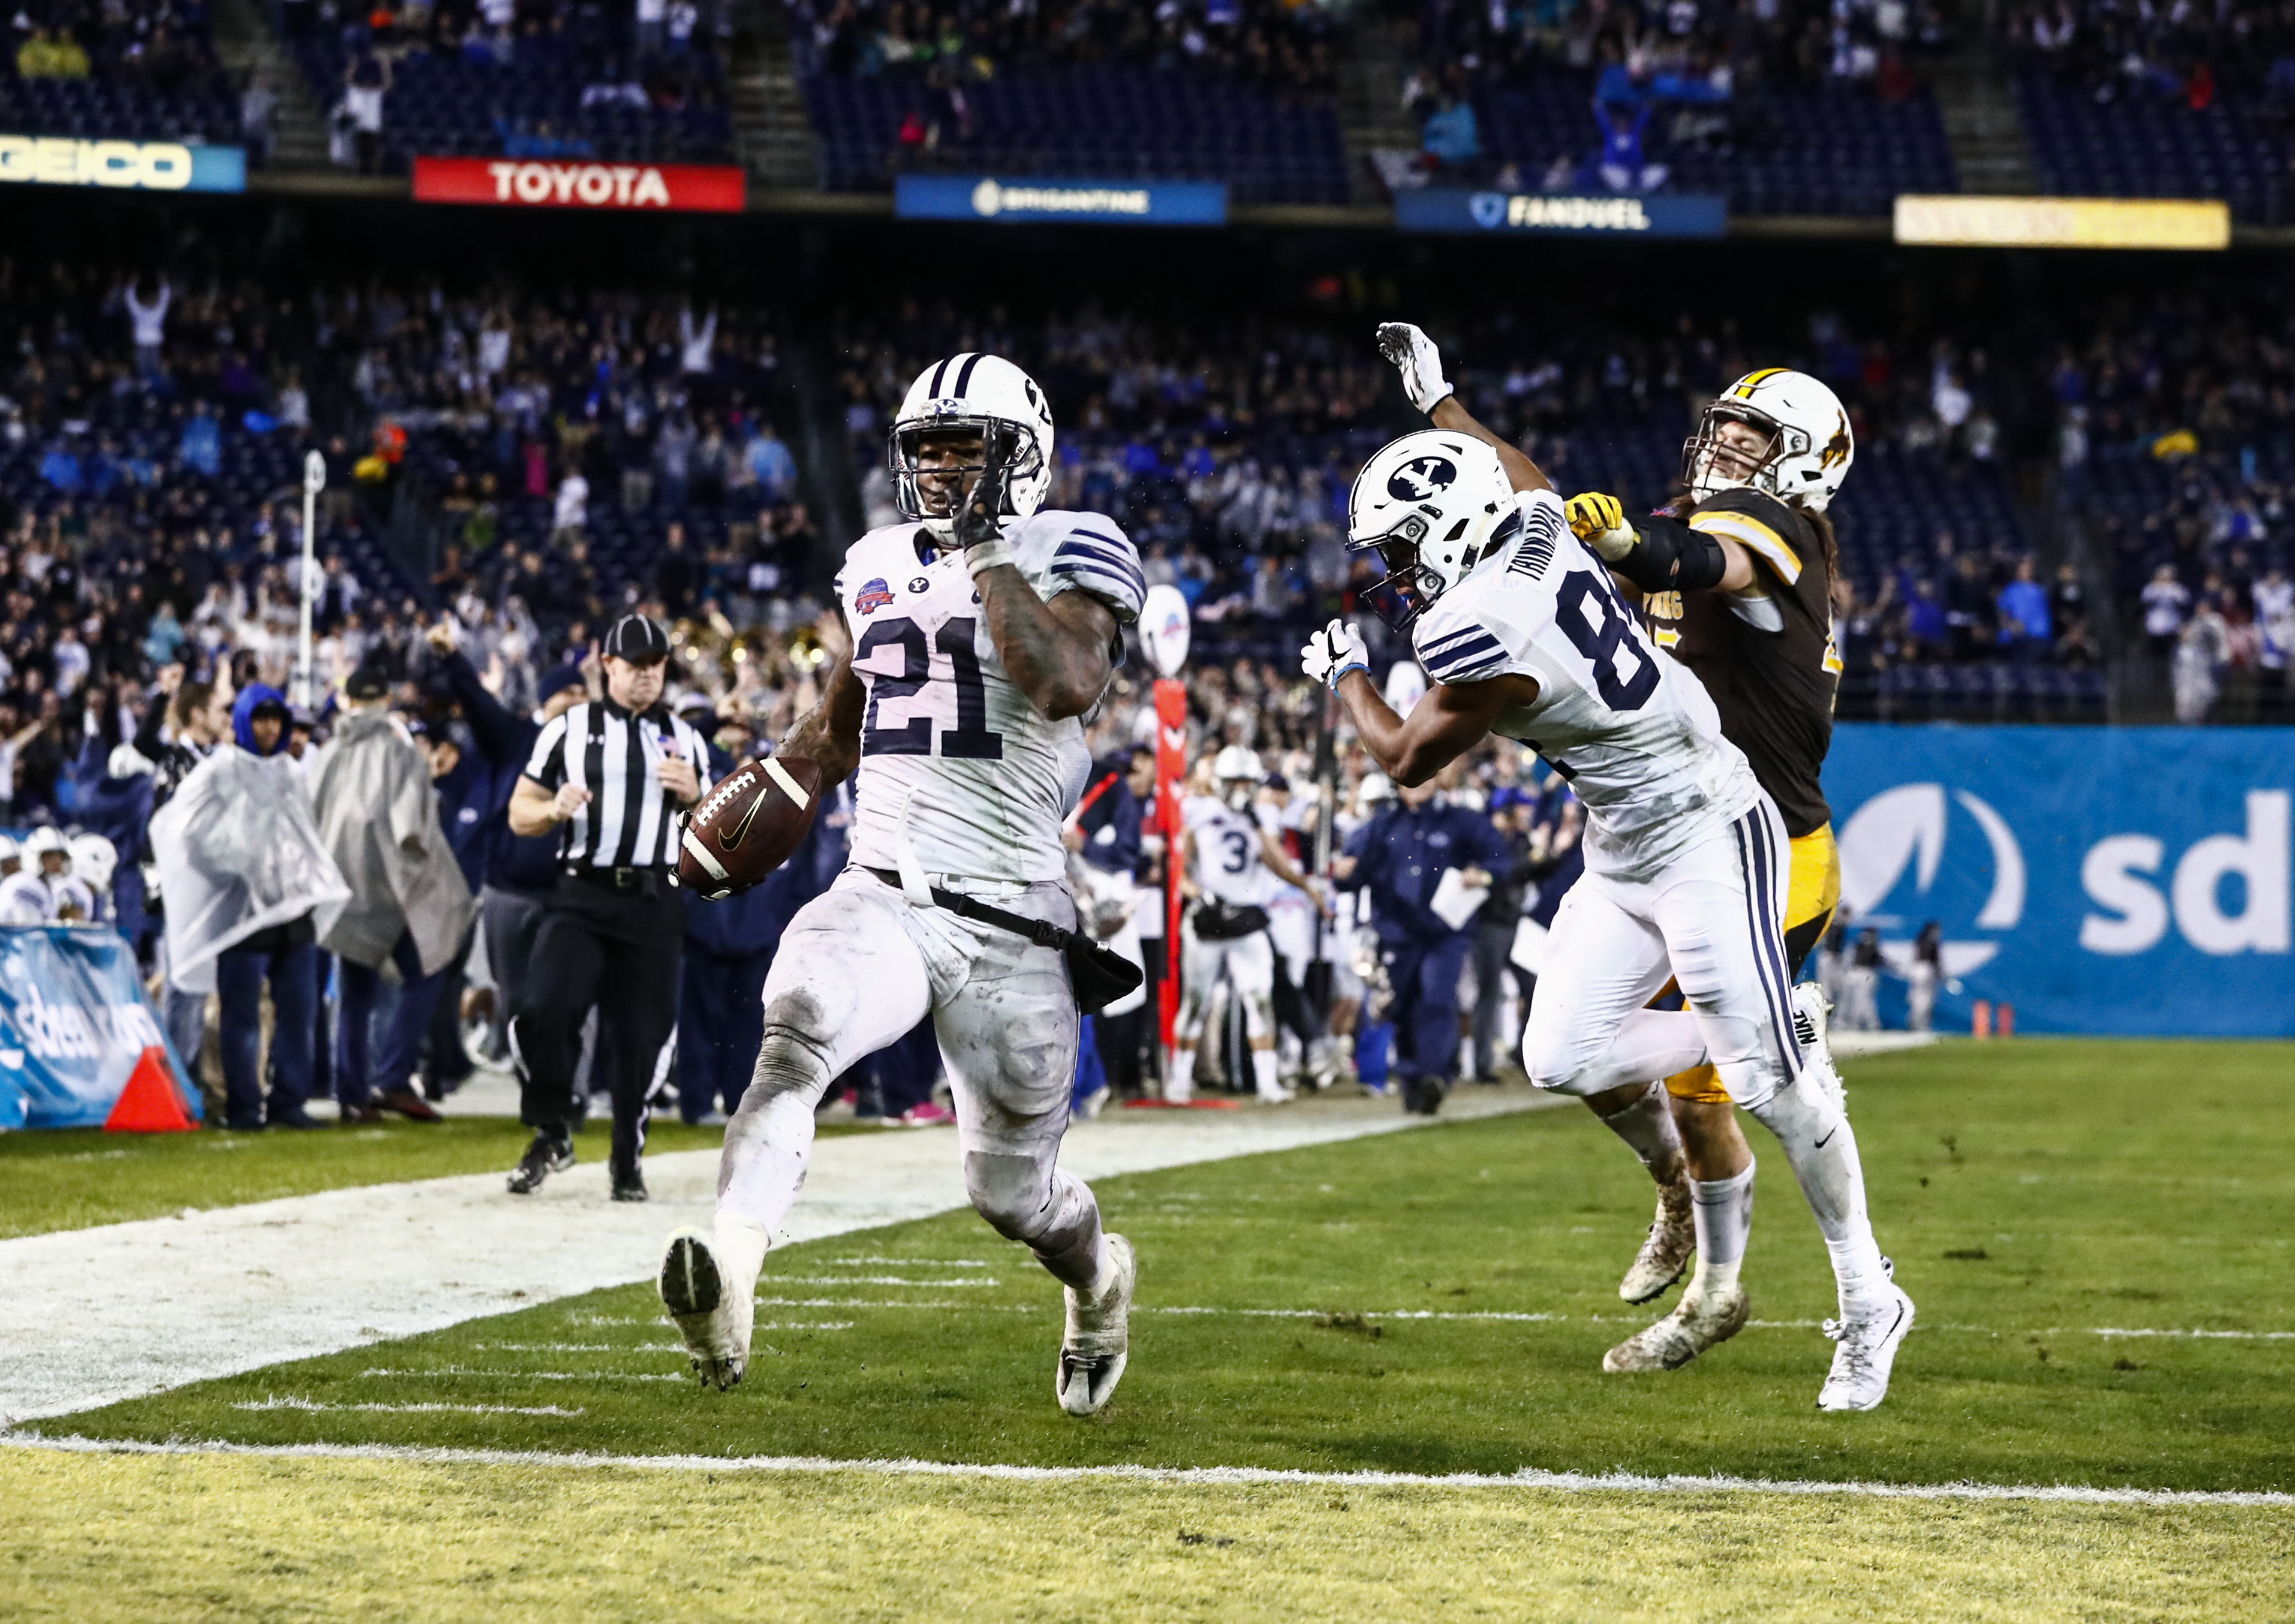 Jamaal Williams celebrates after scoring a touchdown in the Poinsettia Bowl. (BYU Photo)